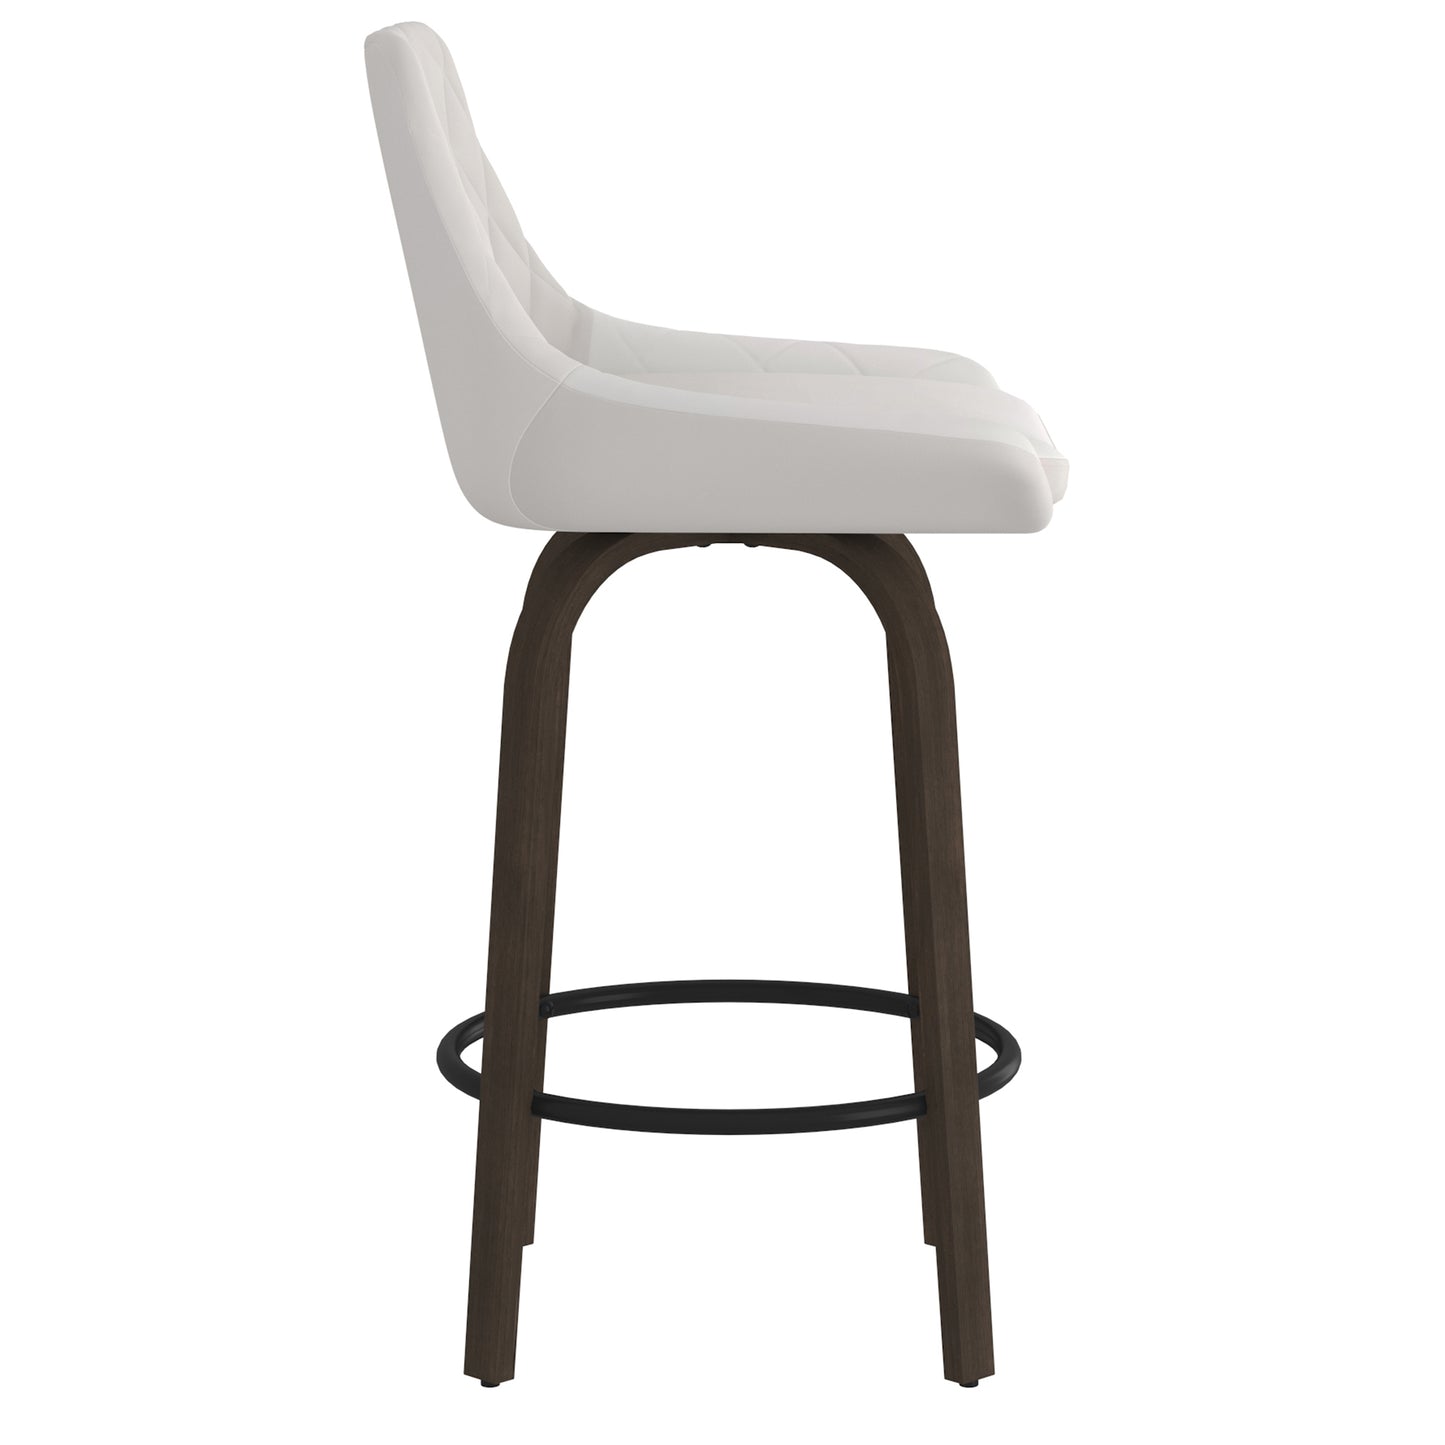 Kenzo 26" Counter Stool, Set of 2 in White and Walnut